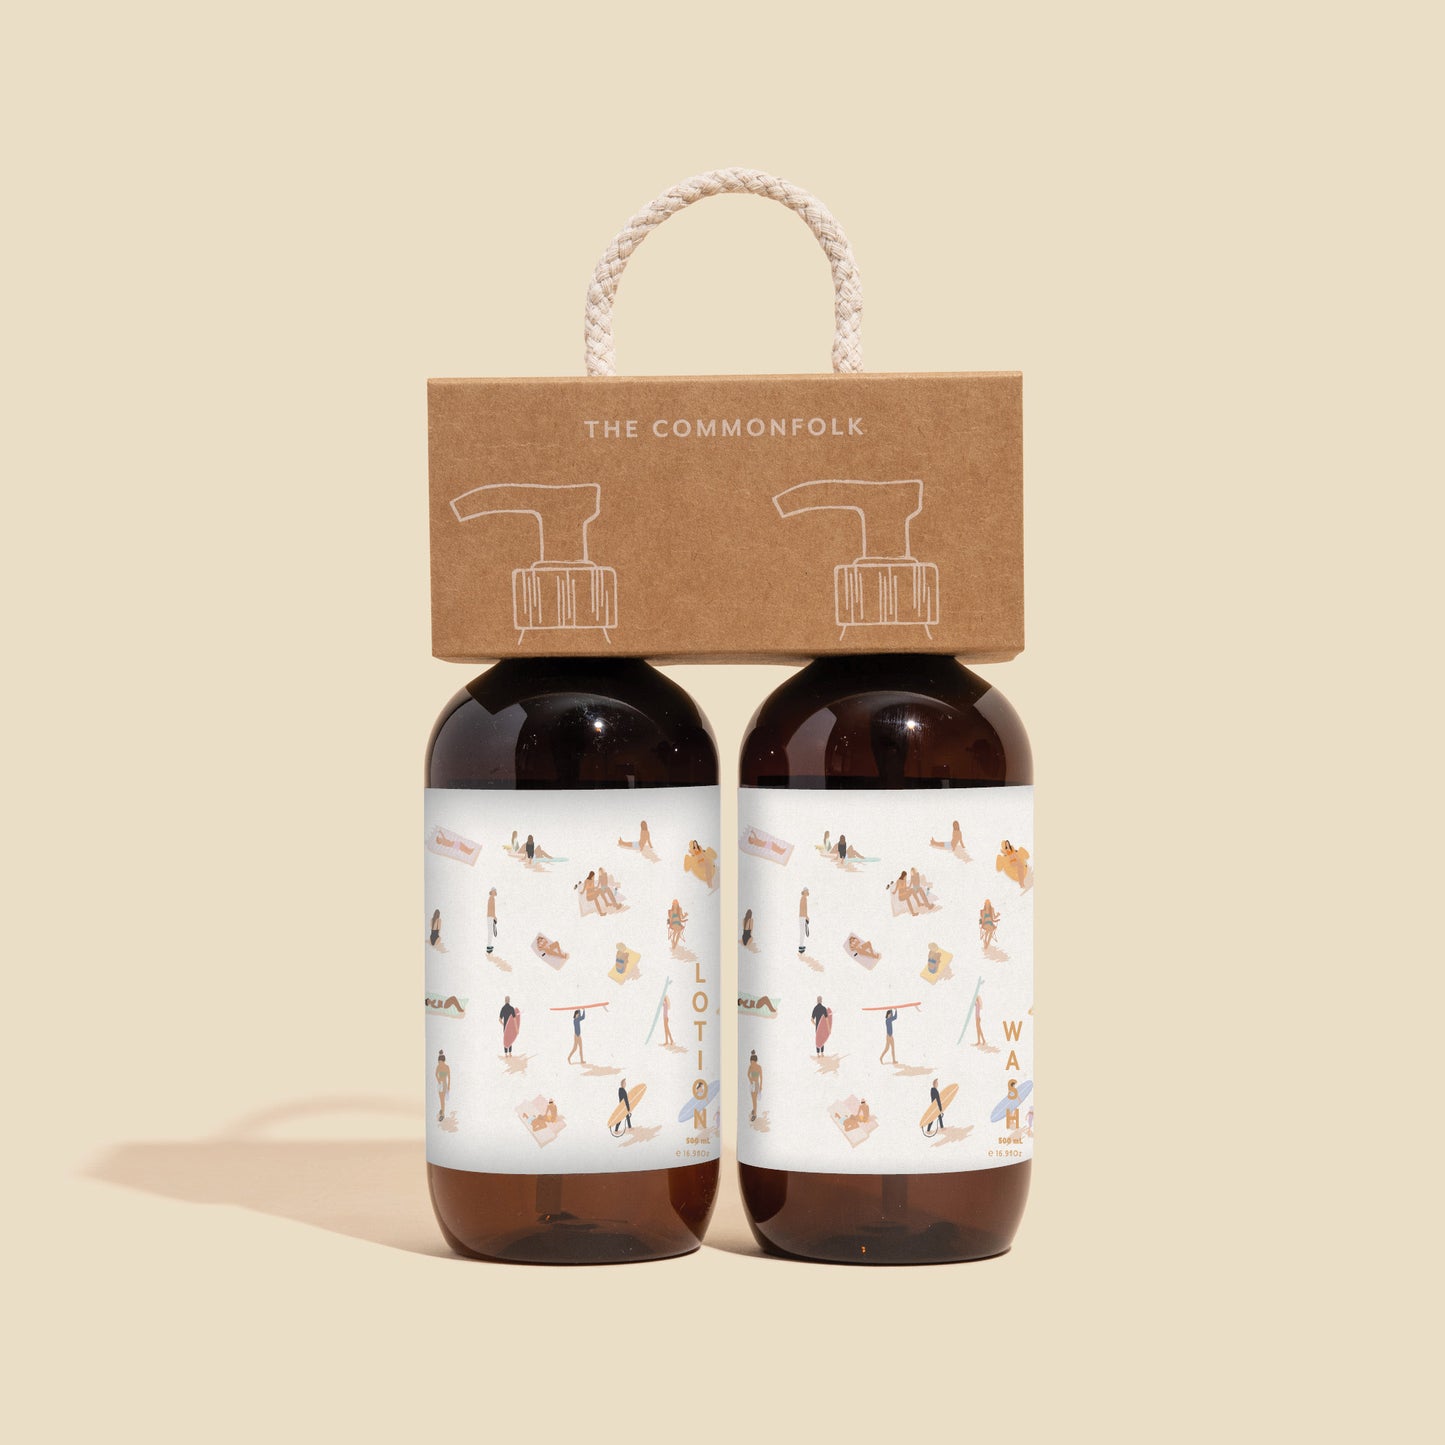 Wash + Lotion Kit - Beach from Above ft. Cut Outs Co